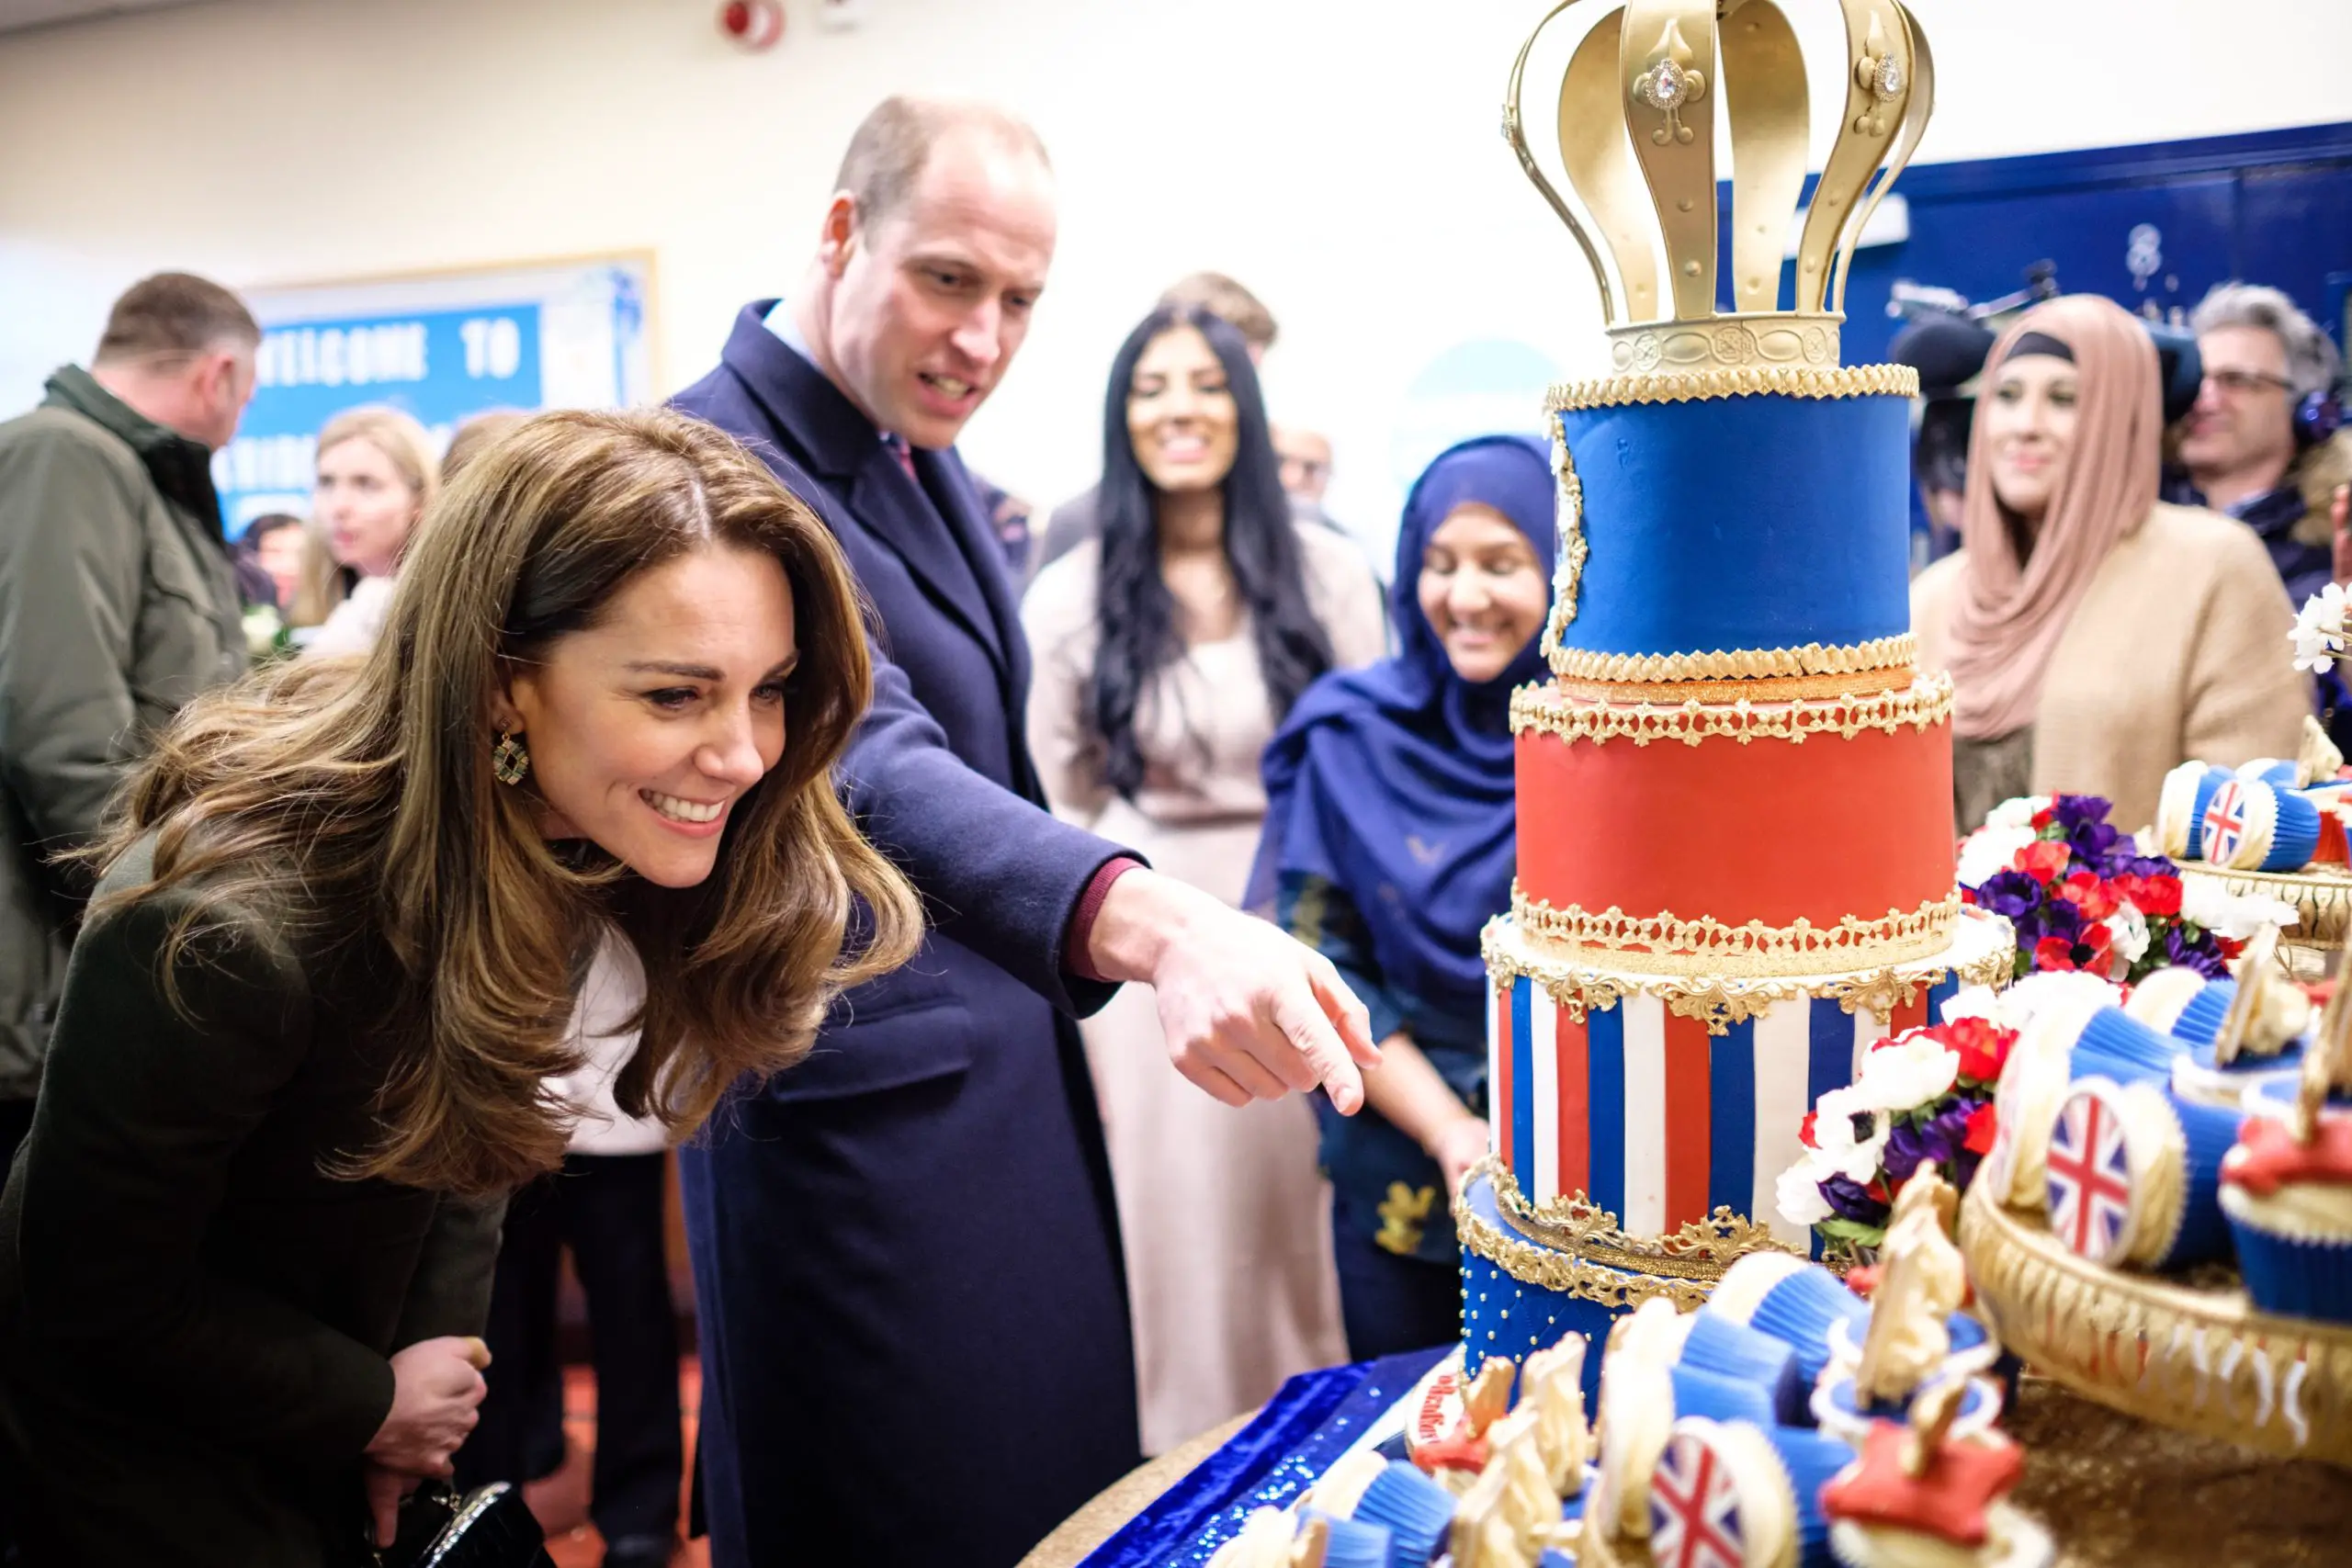 The Duke and Duchess of Cambridge presented with a colourful 'William and Kate' Cake during a visit to Bradford